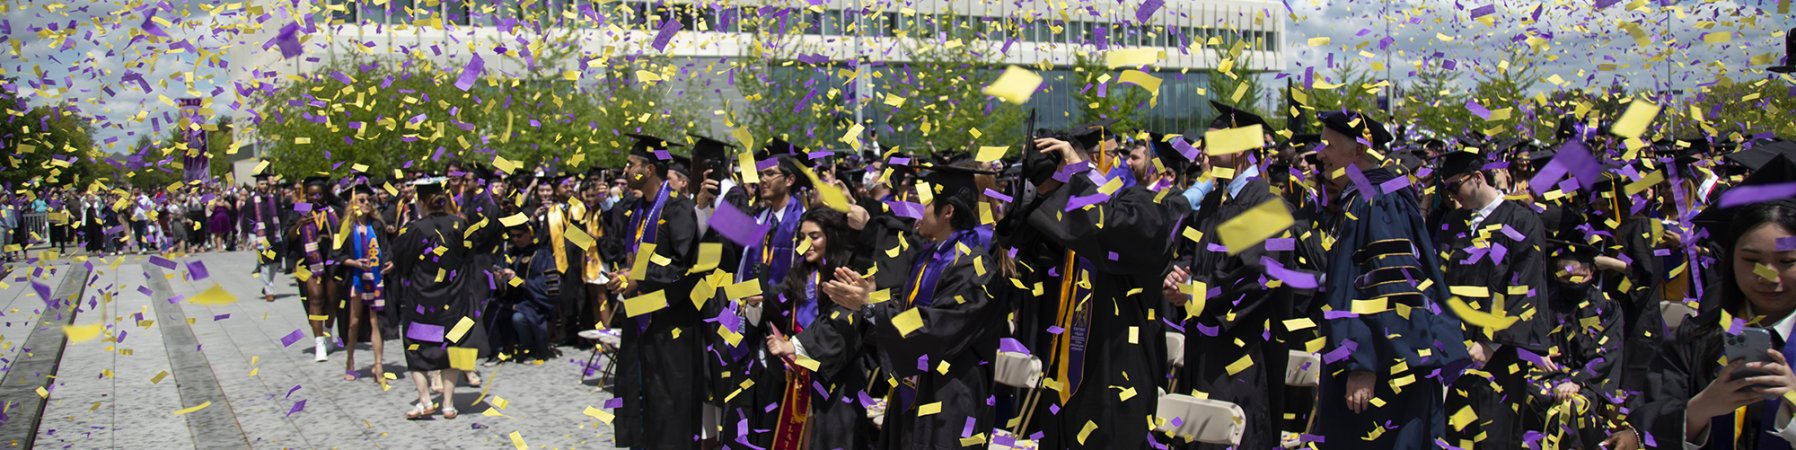 Students celebrating at commencement